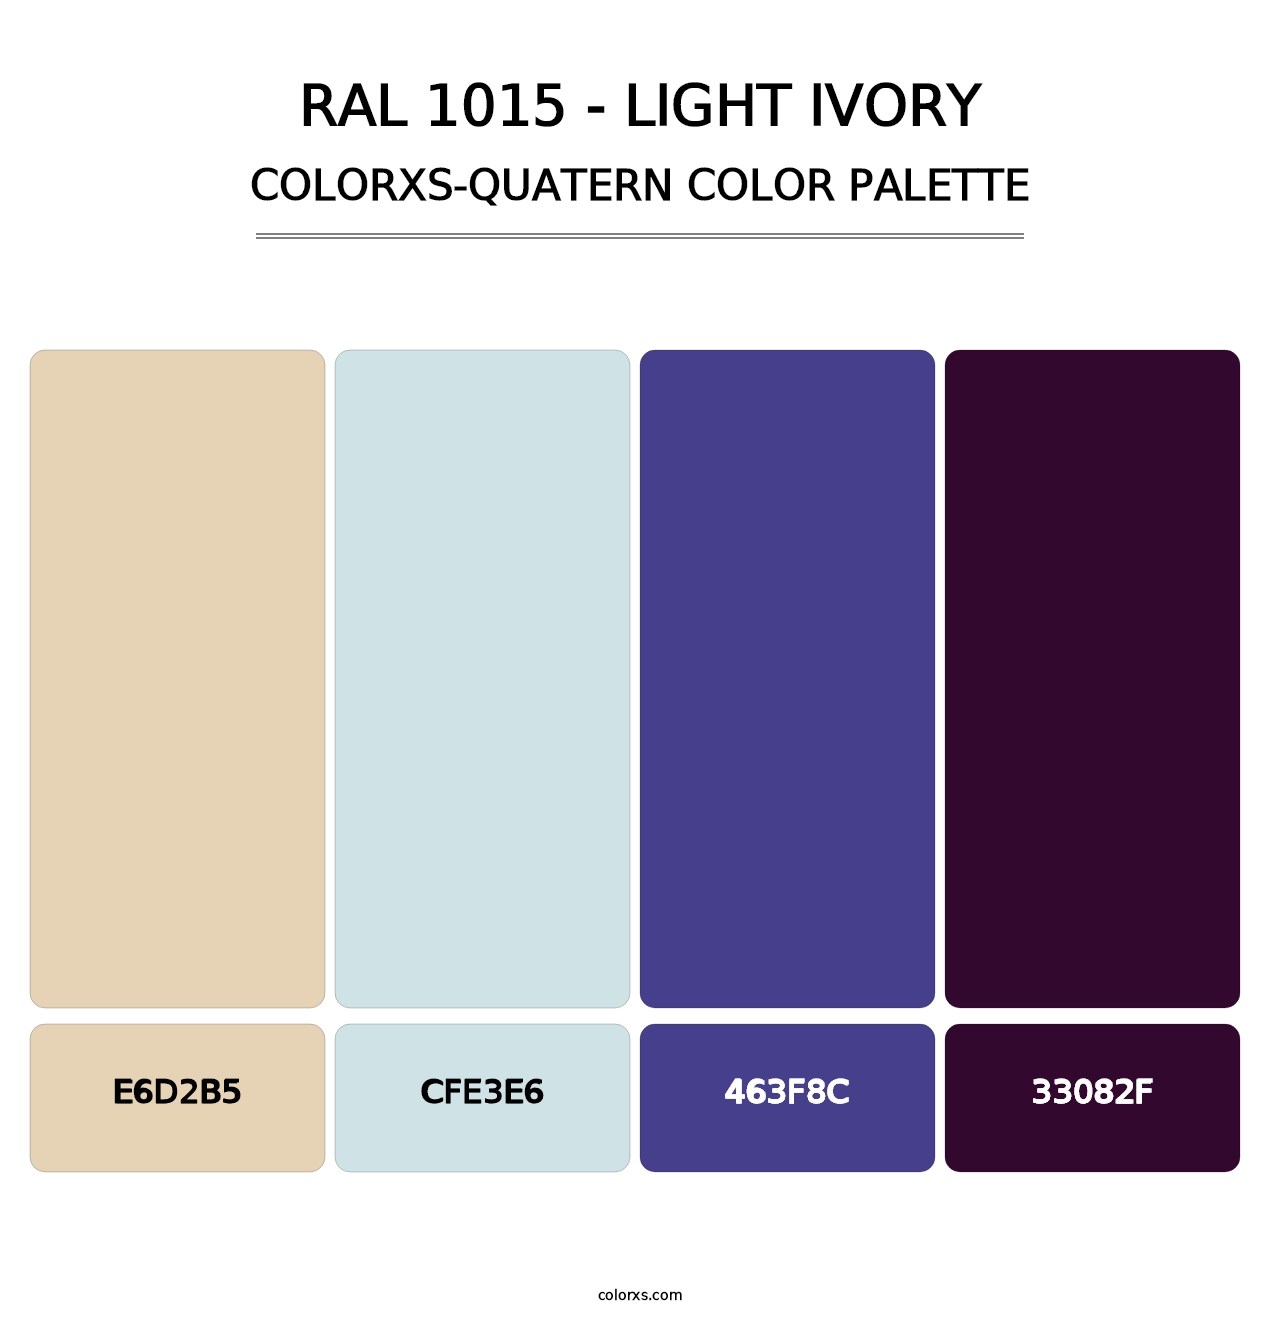 RAL 1015 - Light Ivory - Colorxs Quatern Palette